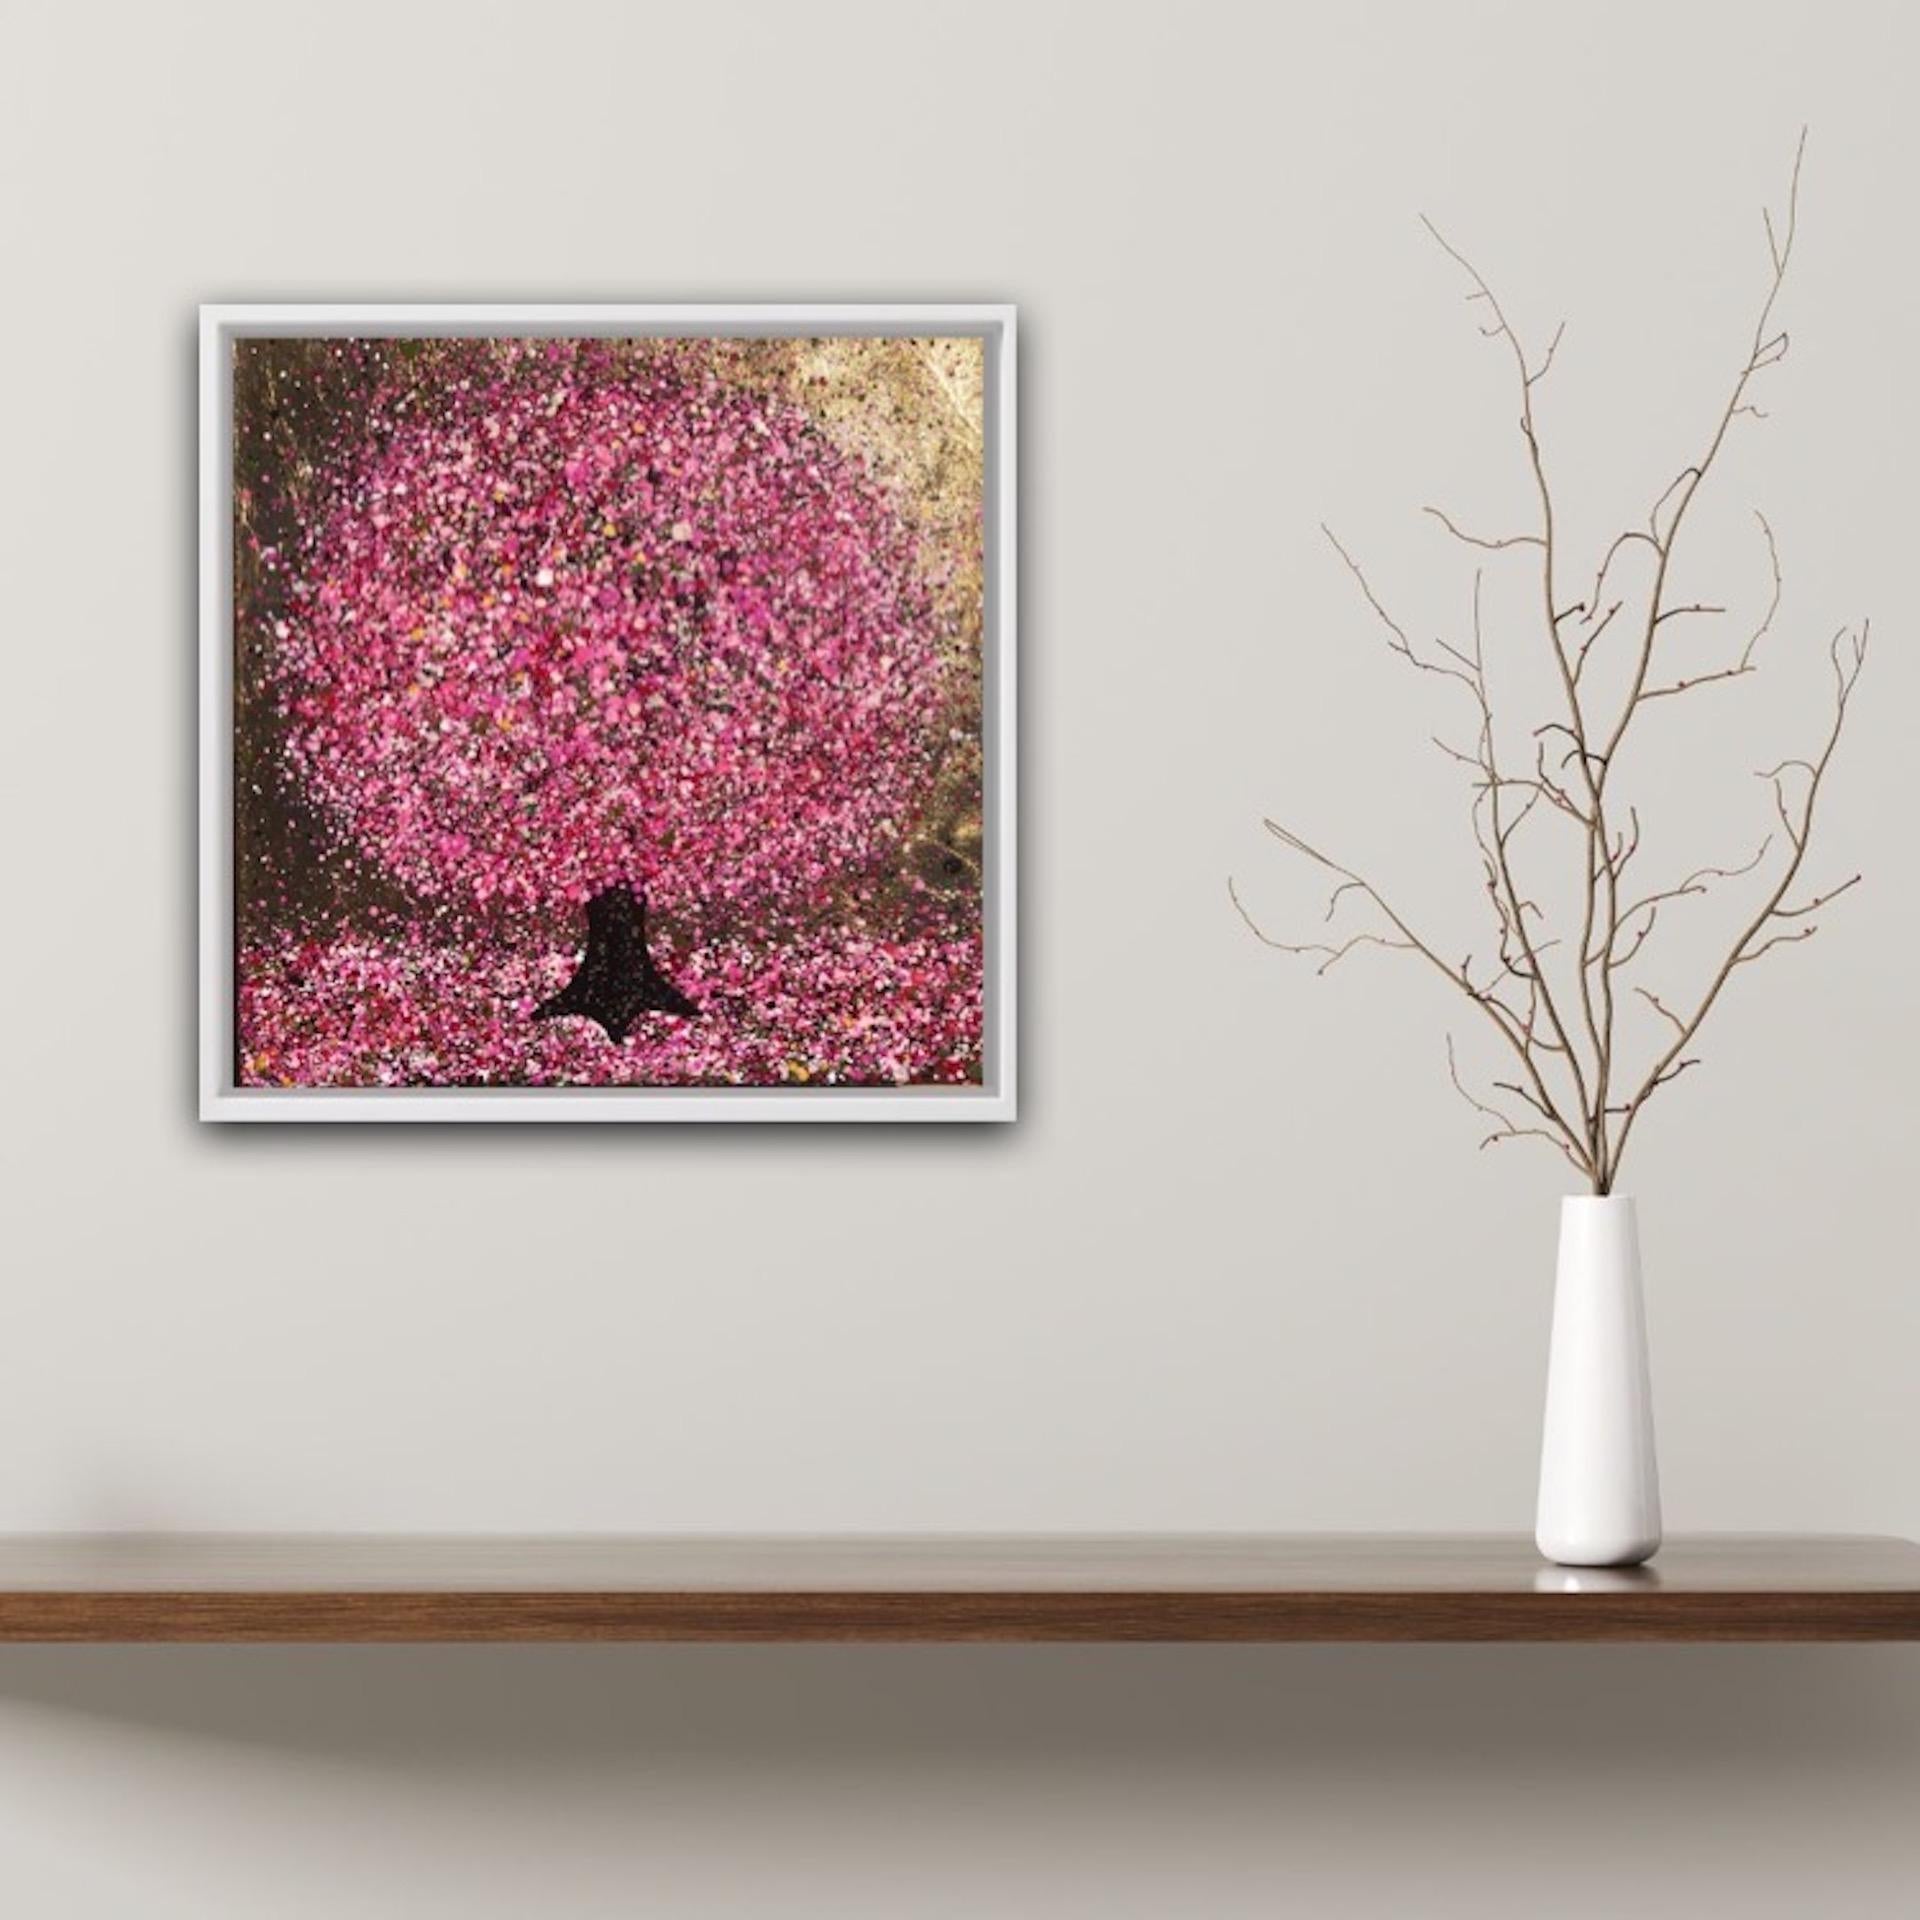 Nicky Chubb
Wonderful Blossom
Original Landscape Painting
Acrylic Paint and Gold Leaf on Canvas
Canvas Size: H 30cm x W 30cm x D 4cm
Sold Unframed
Free Shipping
Please note that insitu images are purely an indication of how a piece may